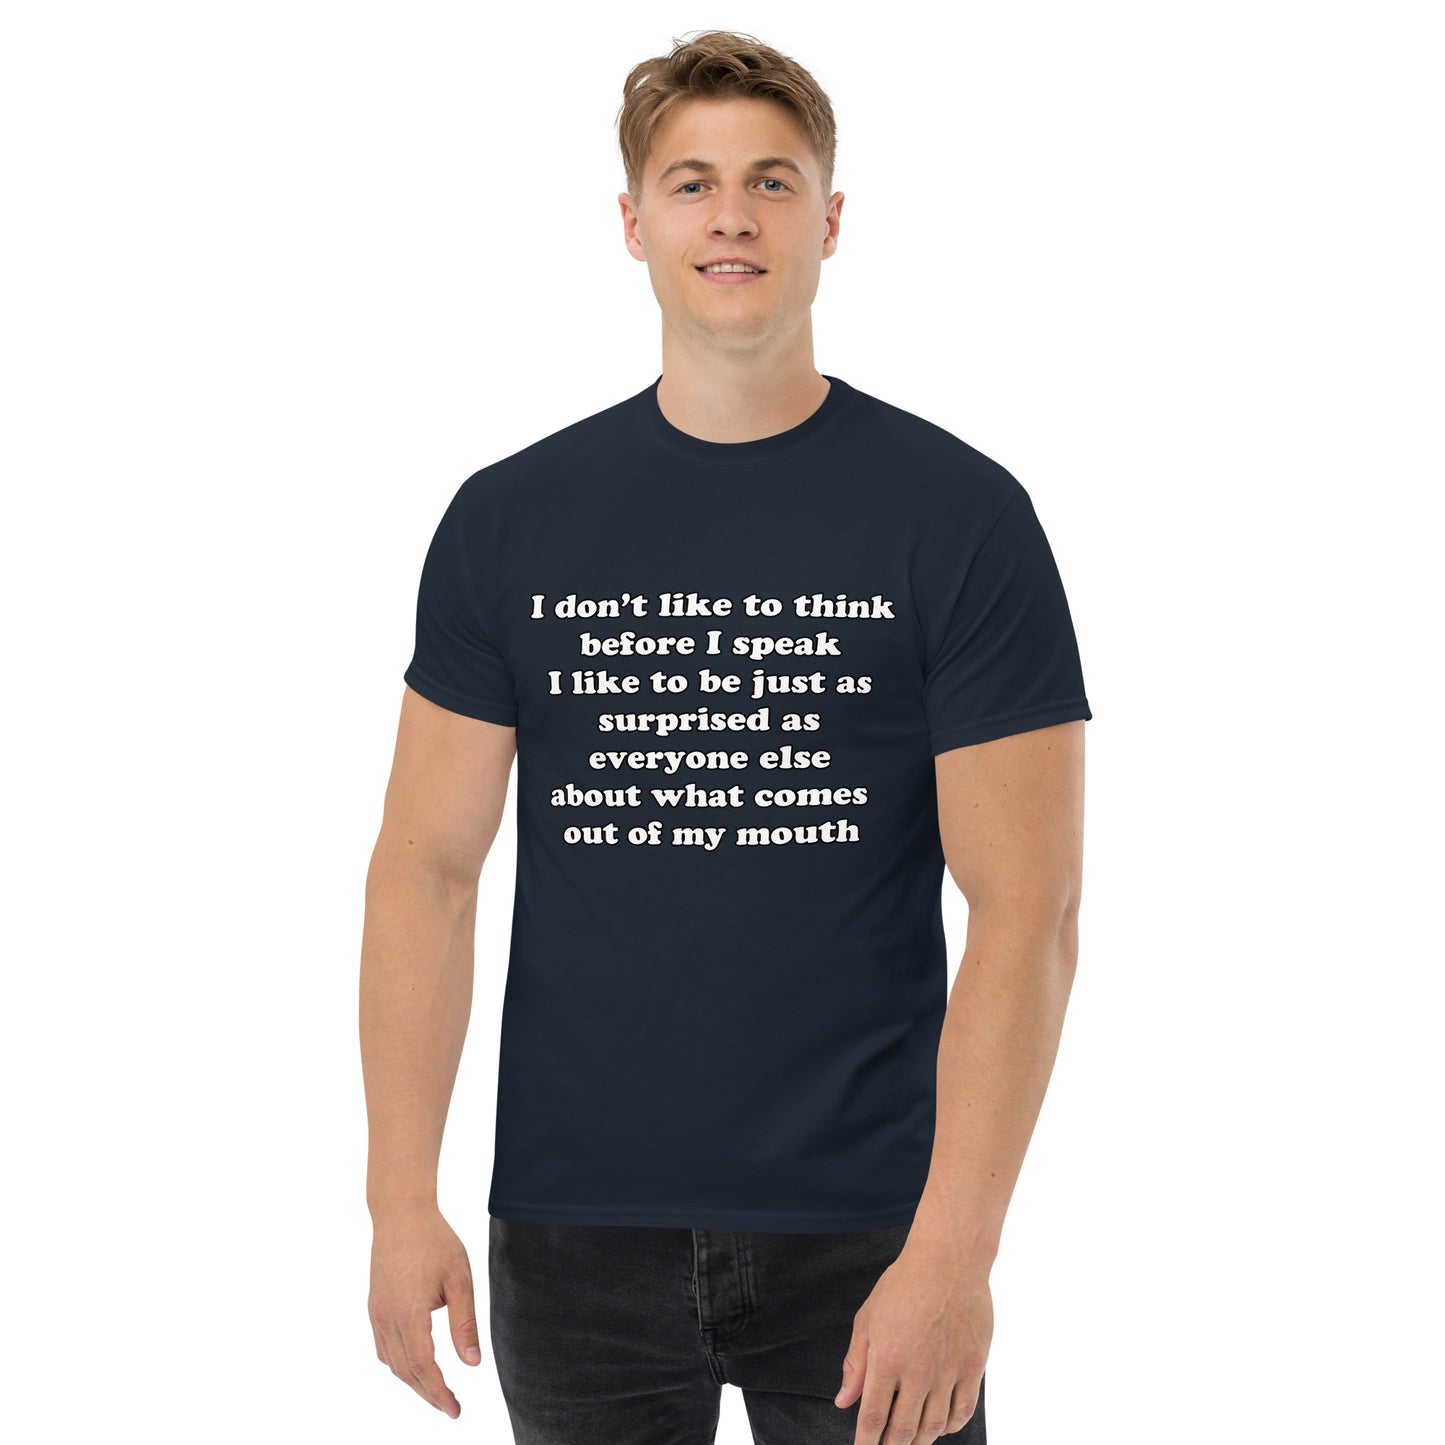 Man with navy blue t-shirt with text “I don't think before I speak Just as serprised as everyone about what comes out of my mouth"